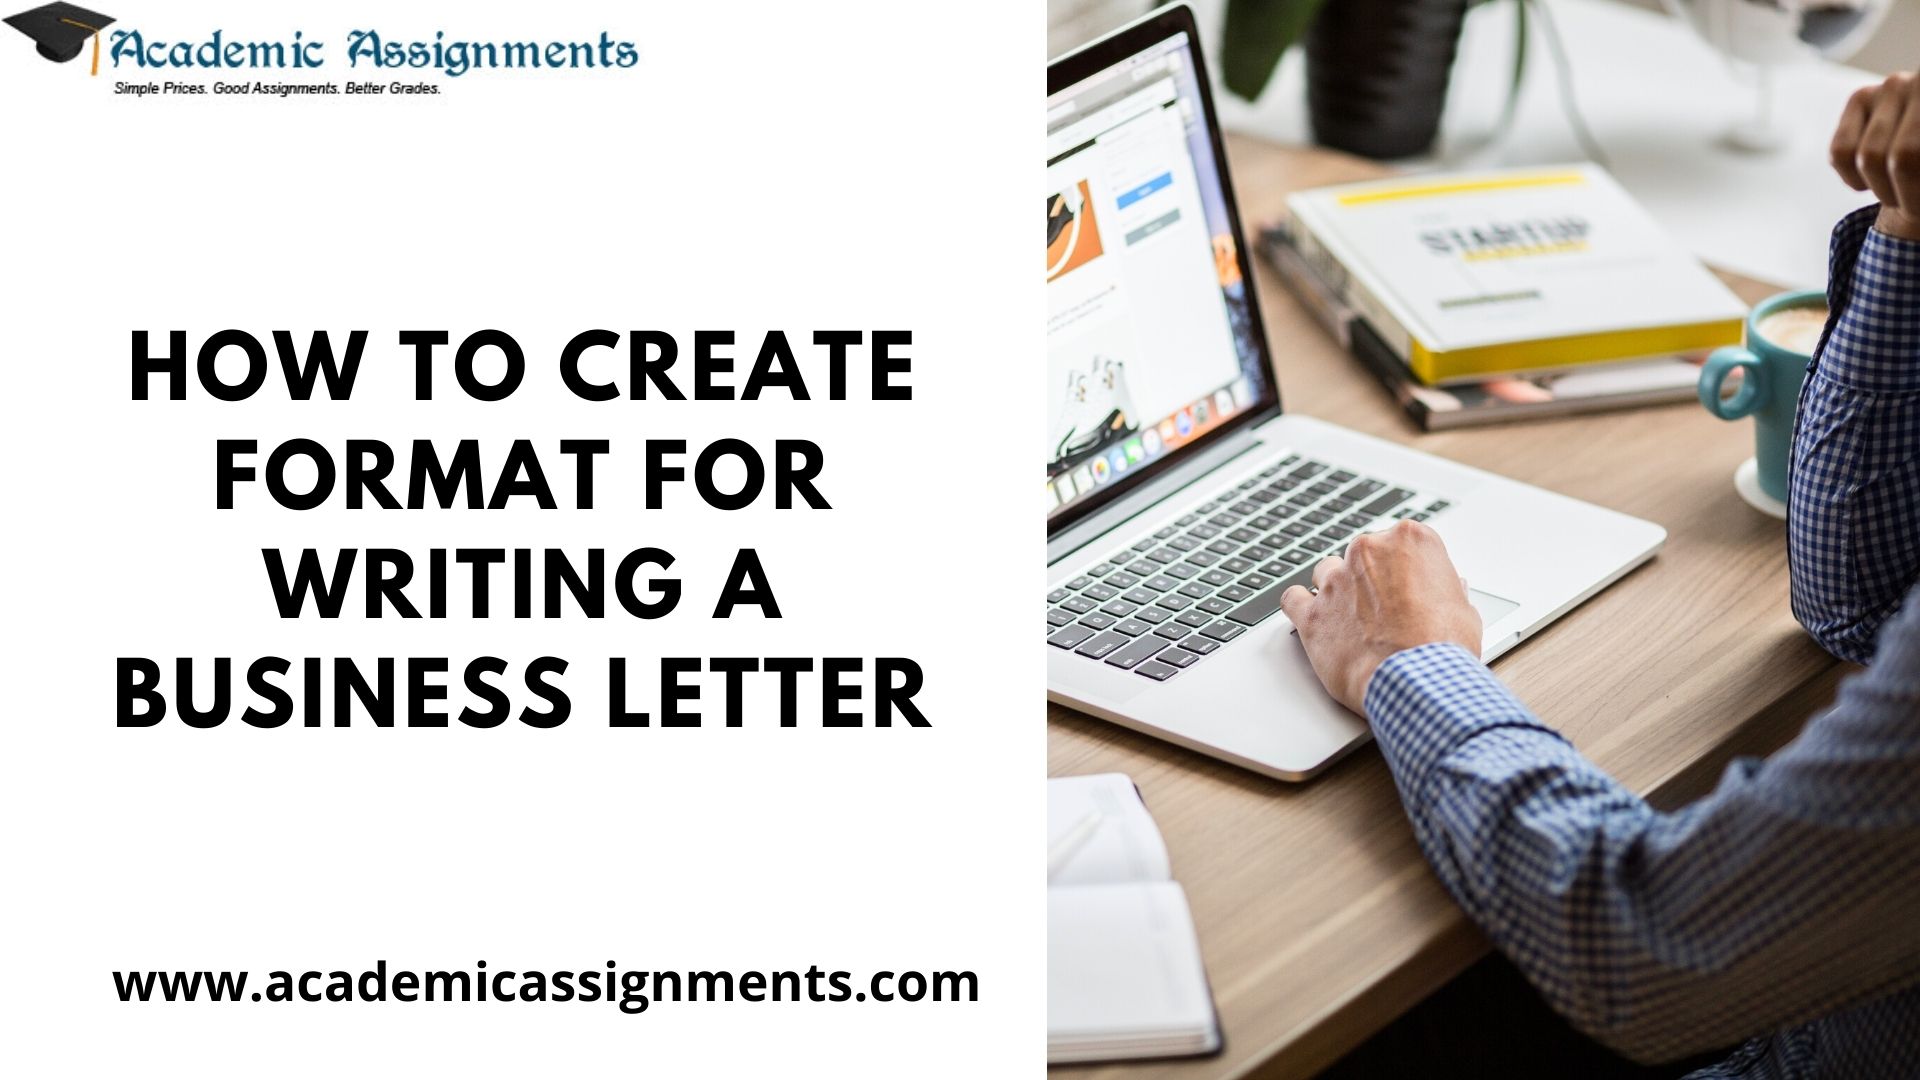 How To Create Format For Writing A Business Letter